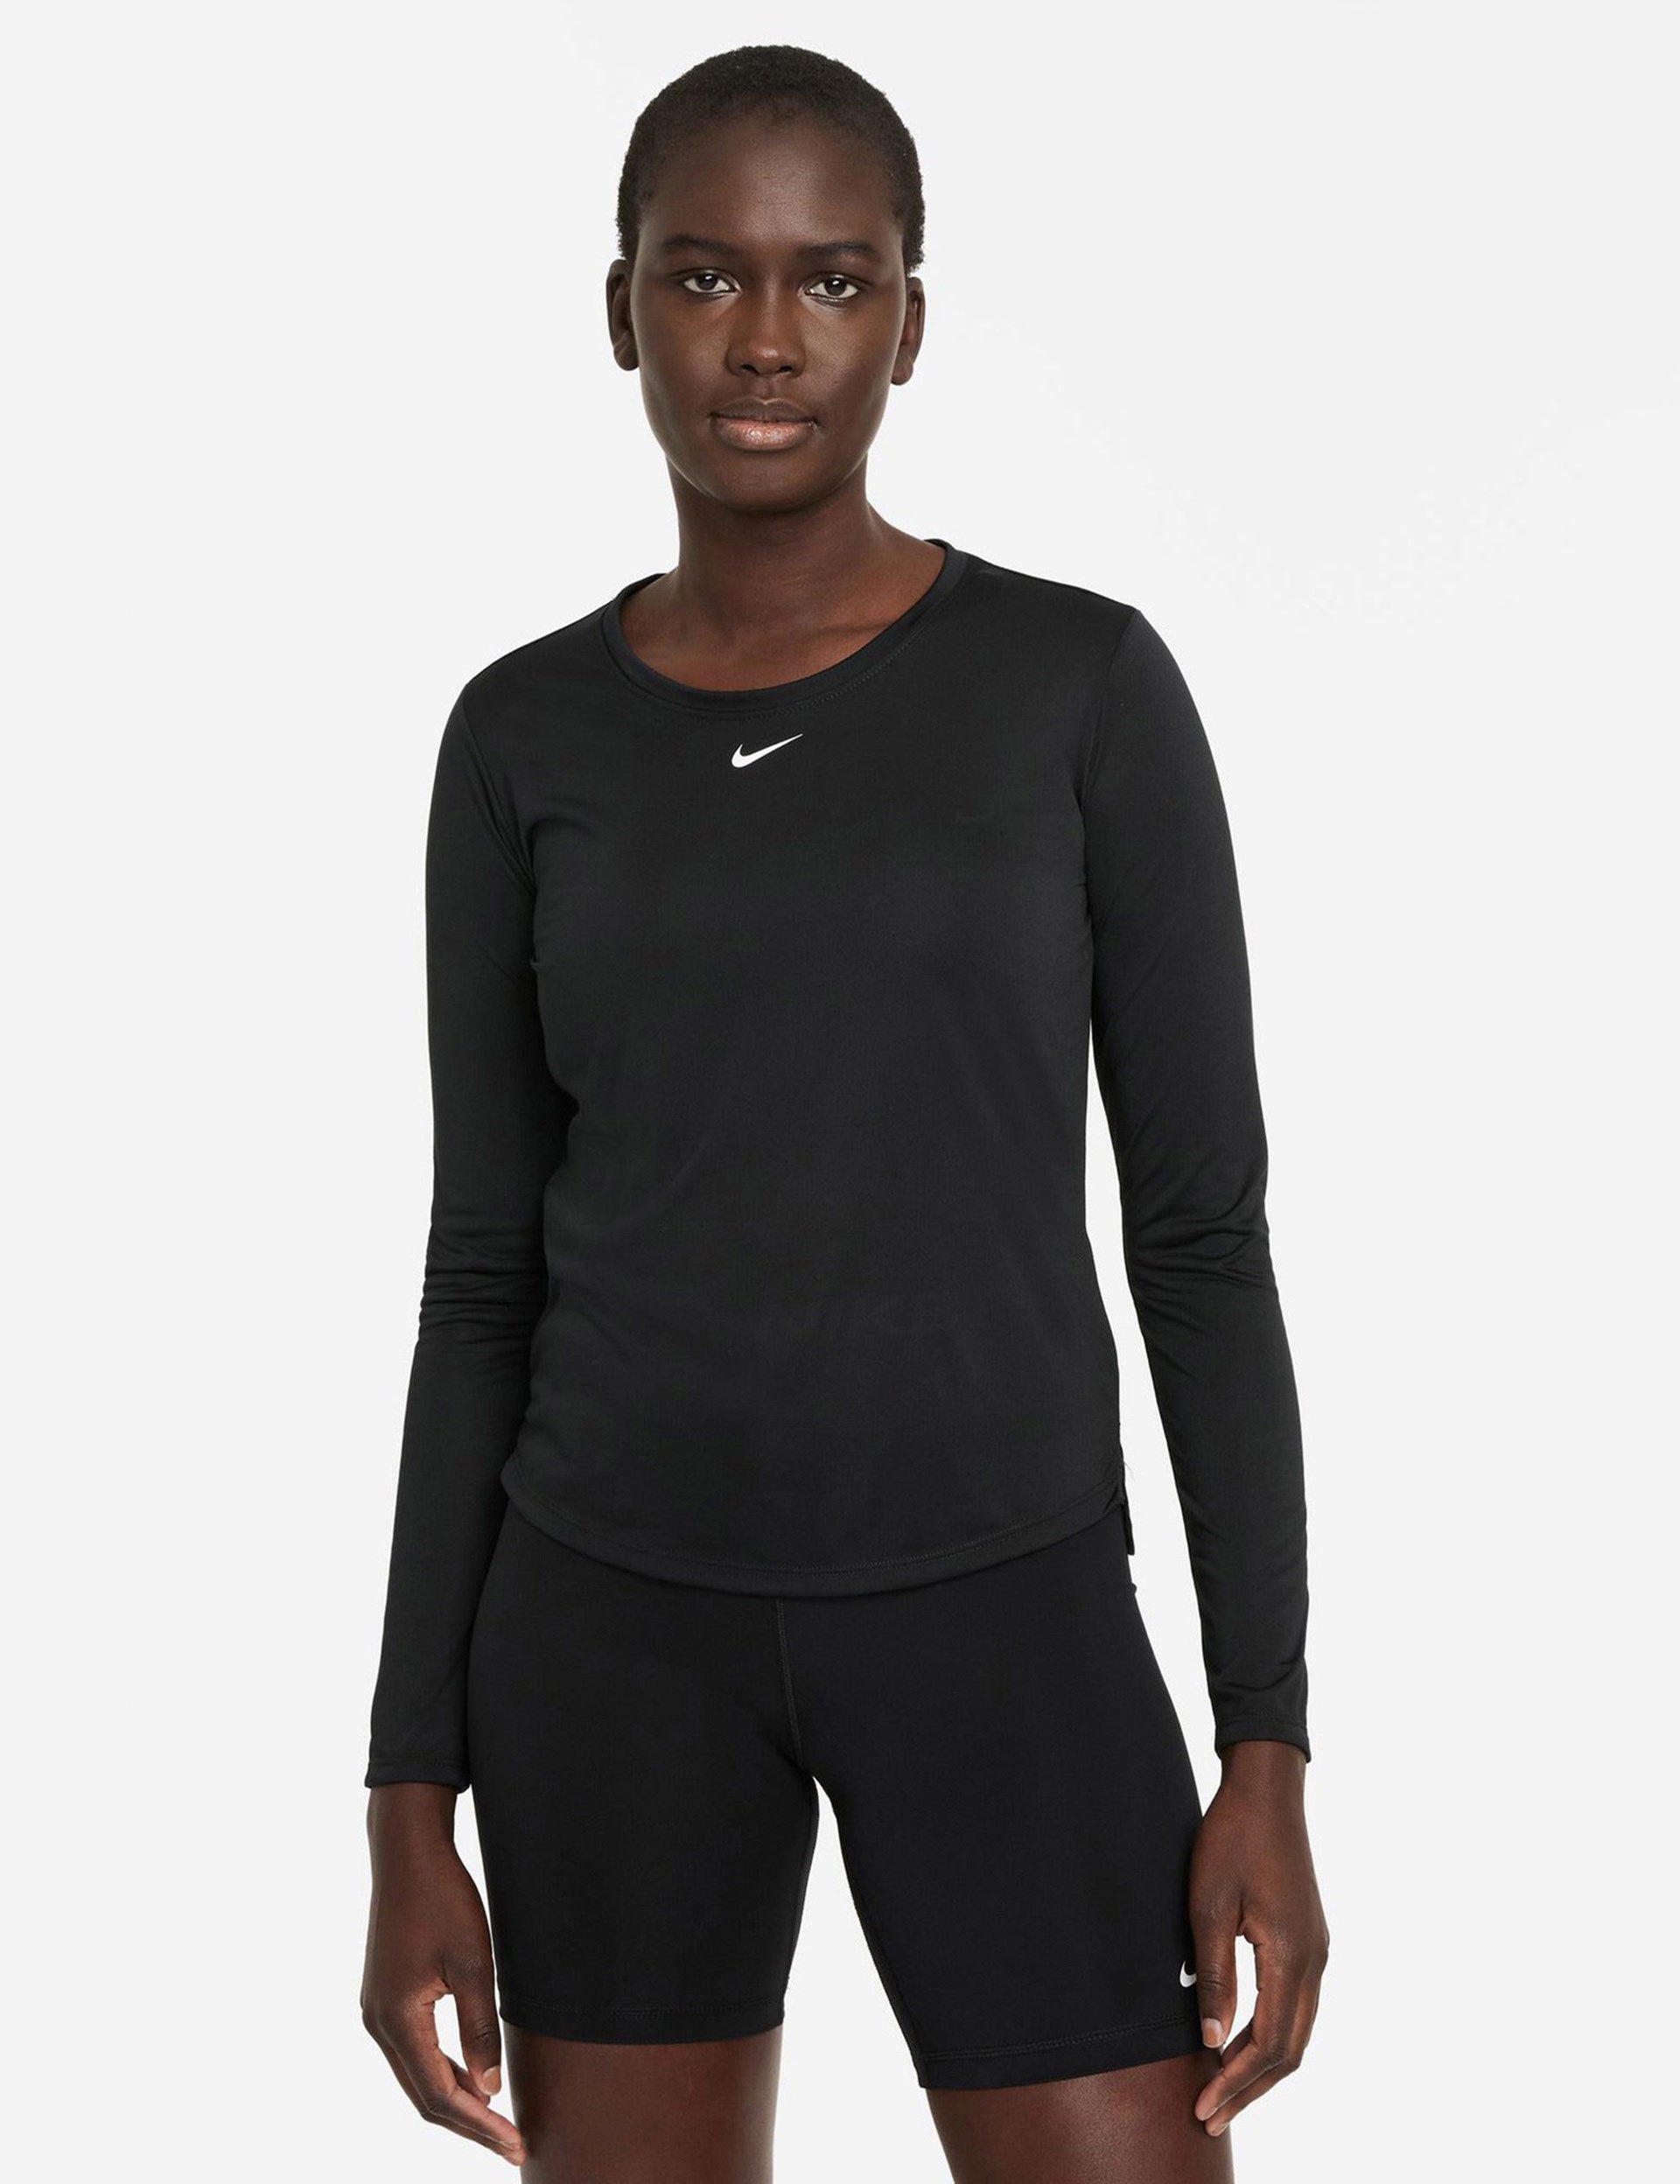 Nike Dri-FIT One Long-Sleeve Top - Black/Whiteimages1- The Sports Edit